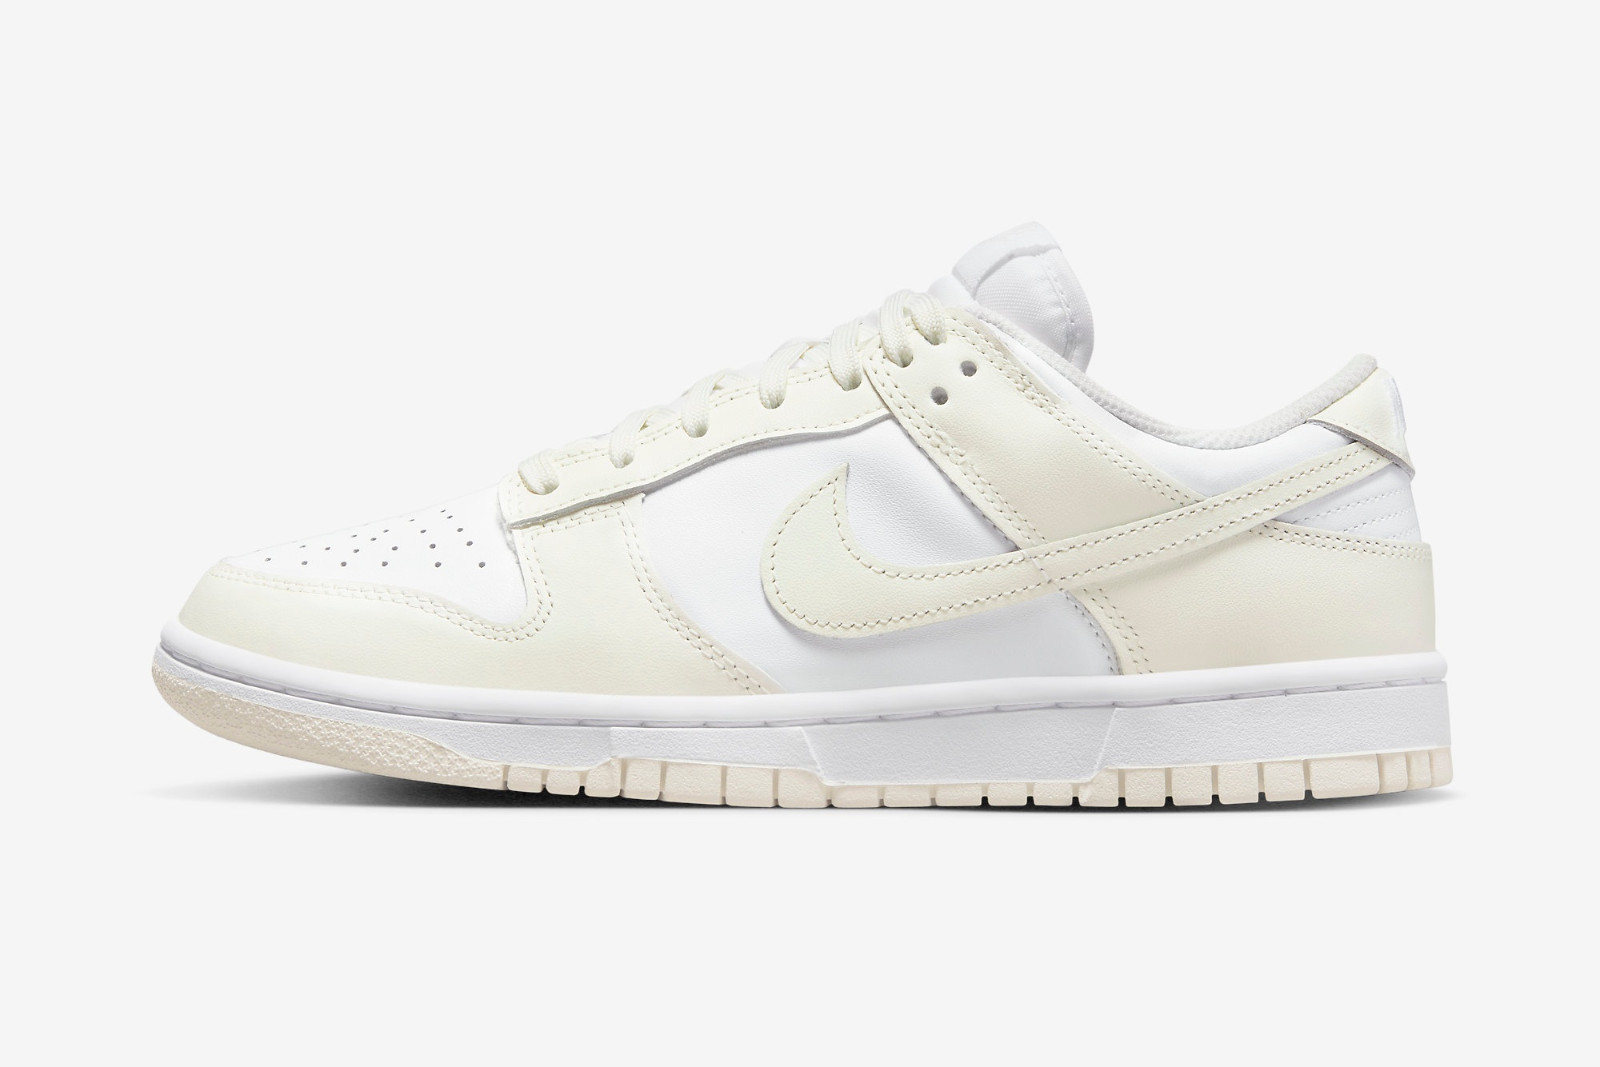 MultiscaleconsultingShops - 121 - frees women sale clearance shoes amazon kids - Nike SB running Dunk Retro Coconut Milk White Sail DD1503